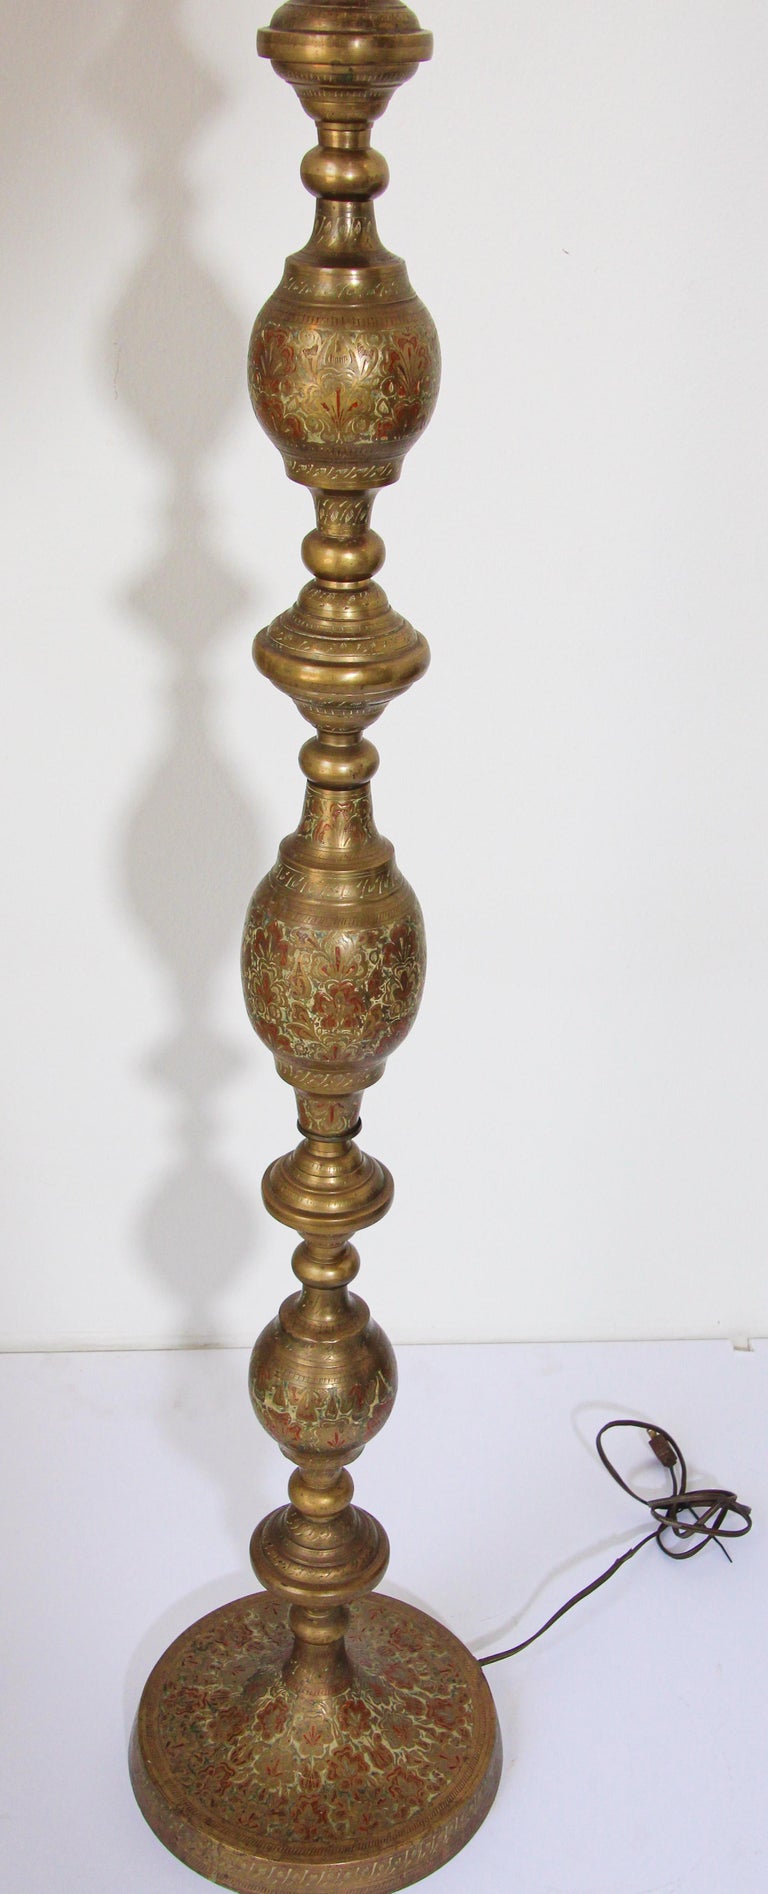 https://a.1stdibscdn.com/vintage-brass-and-enamel-floor-lamp-handcrafted-in-india-for-sale-picture-20/f_9068/f_265998821639840130485/Anglo_Indian_brass_enameled_gold_floor_lamp_India_18_master.jpg?width=768